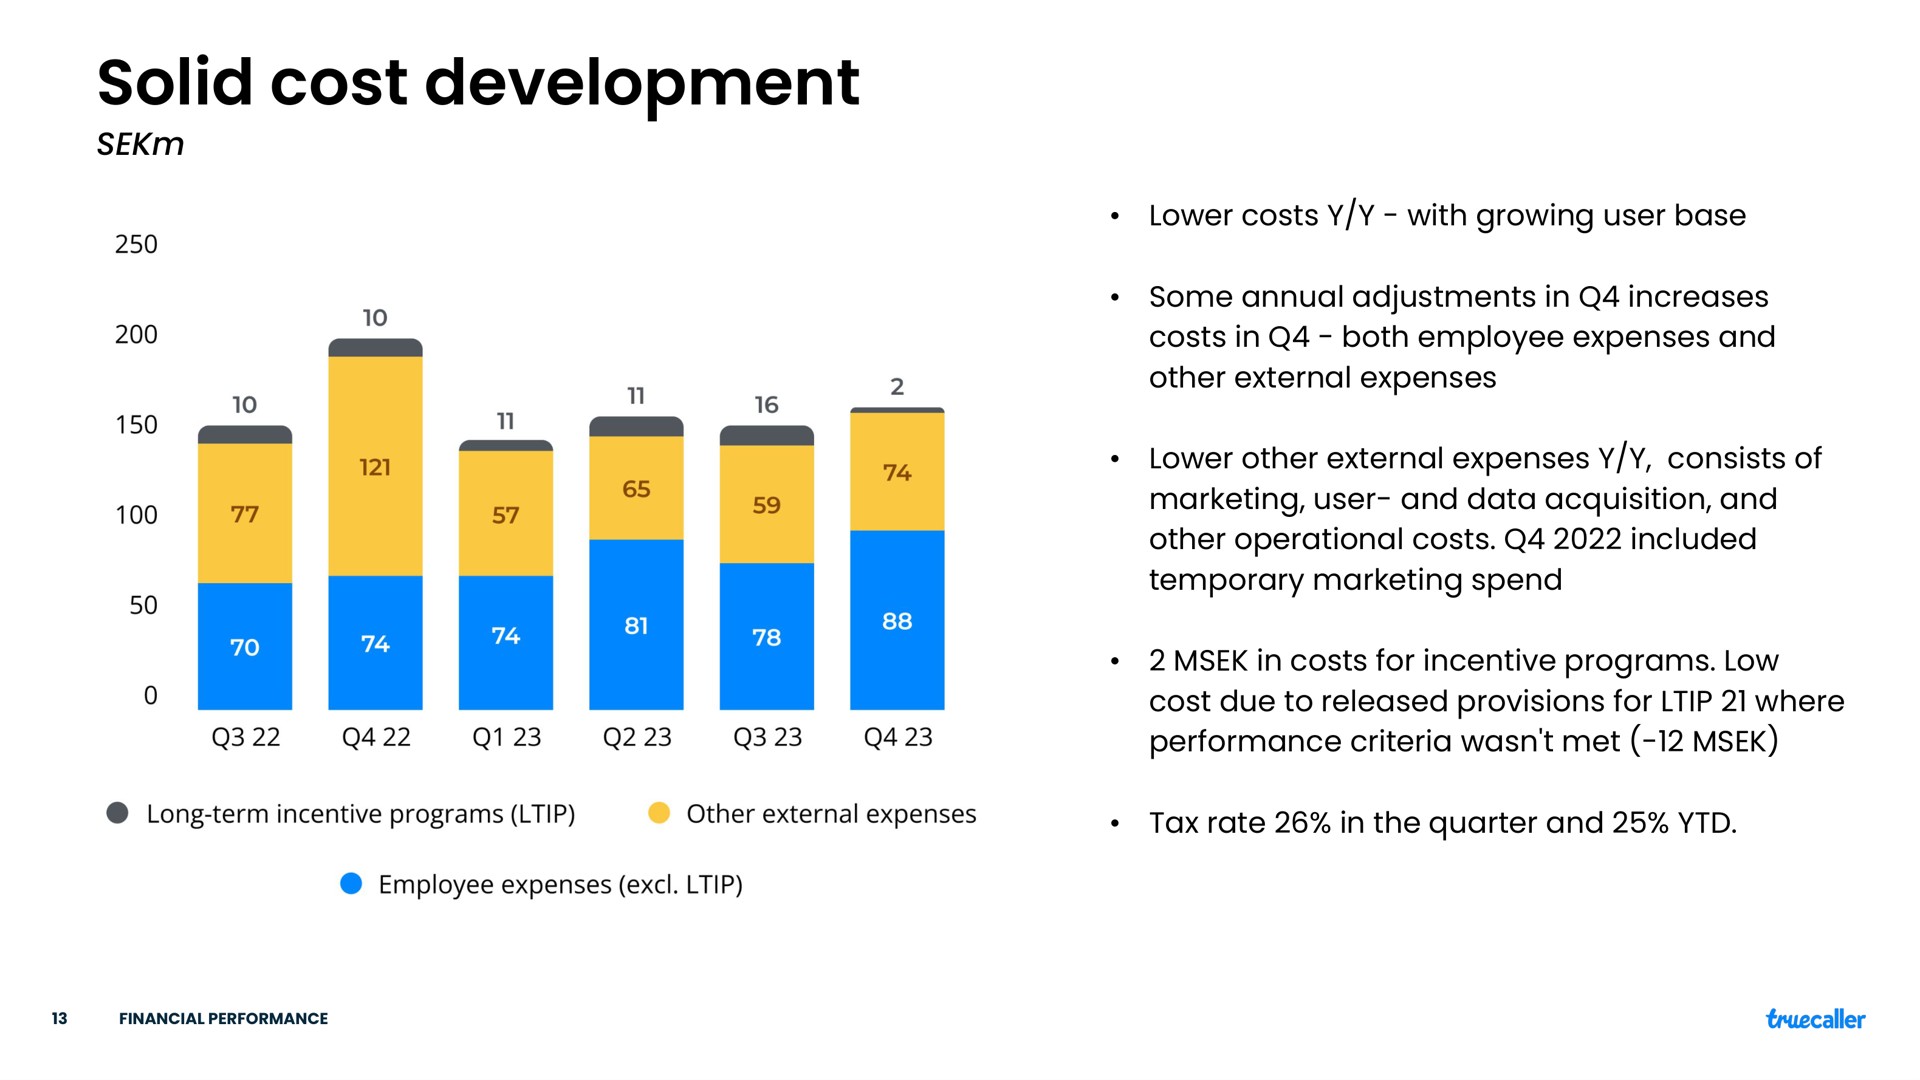 solid cost development lower costs with growing user base some annual adjustments in increases costs in both employee expenses and other external expenses lower other external expenses consists of marketing user and data acquisition and other operational costs included temporary marketing spend in costs for incentive programs low cost due to released provisions for where performance criteria met tax rate in the quarter and | Truecaller